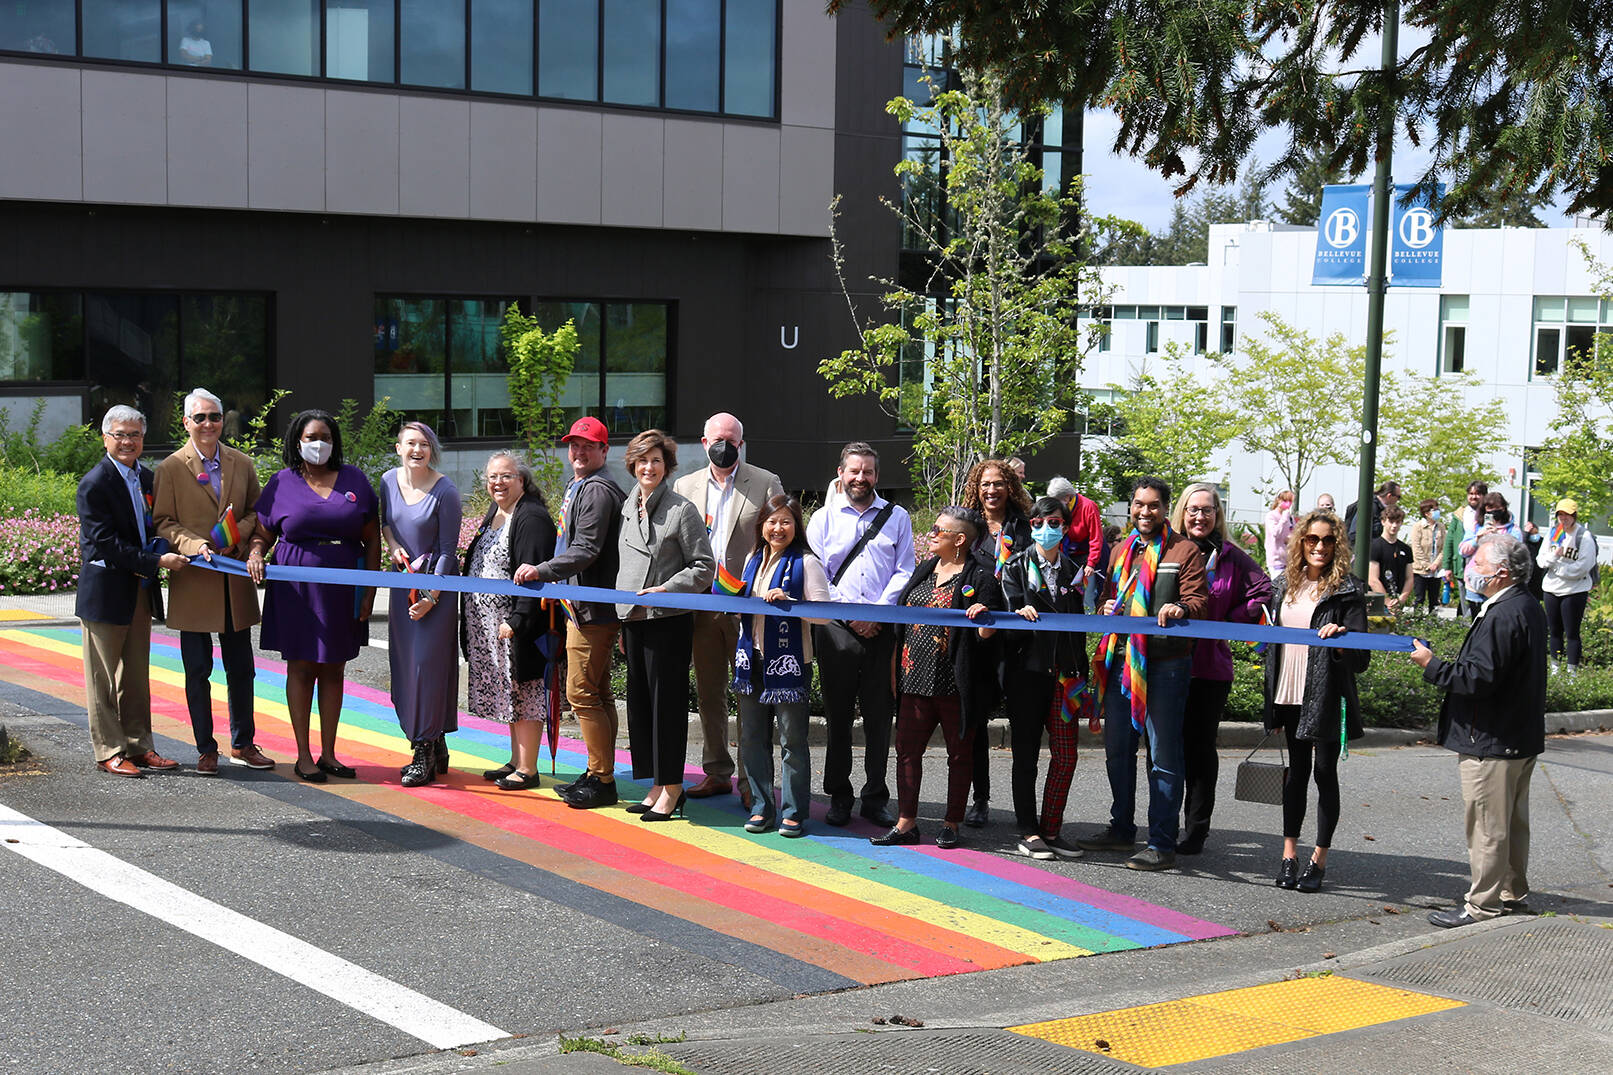 Ribbon cutting ceremony for the first Pride flag crosswalk at Bellevue College on May 17. Courtesy of Bellevue College.